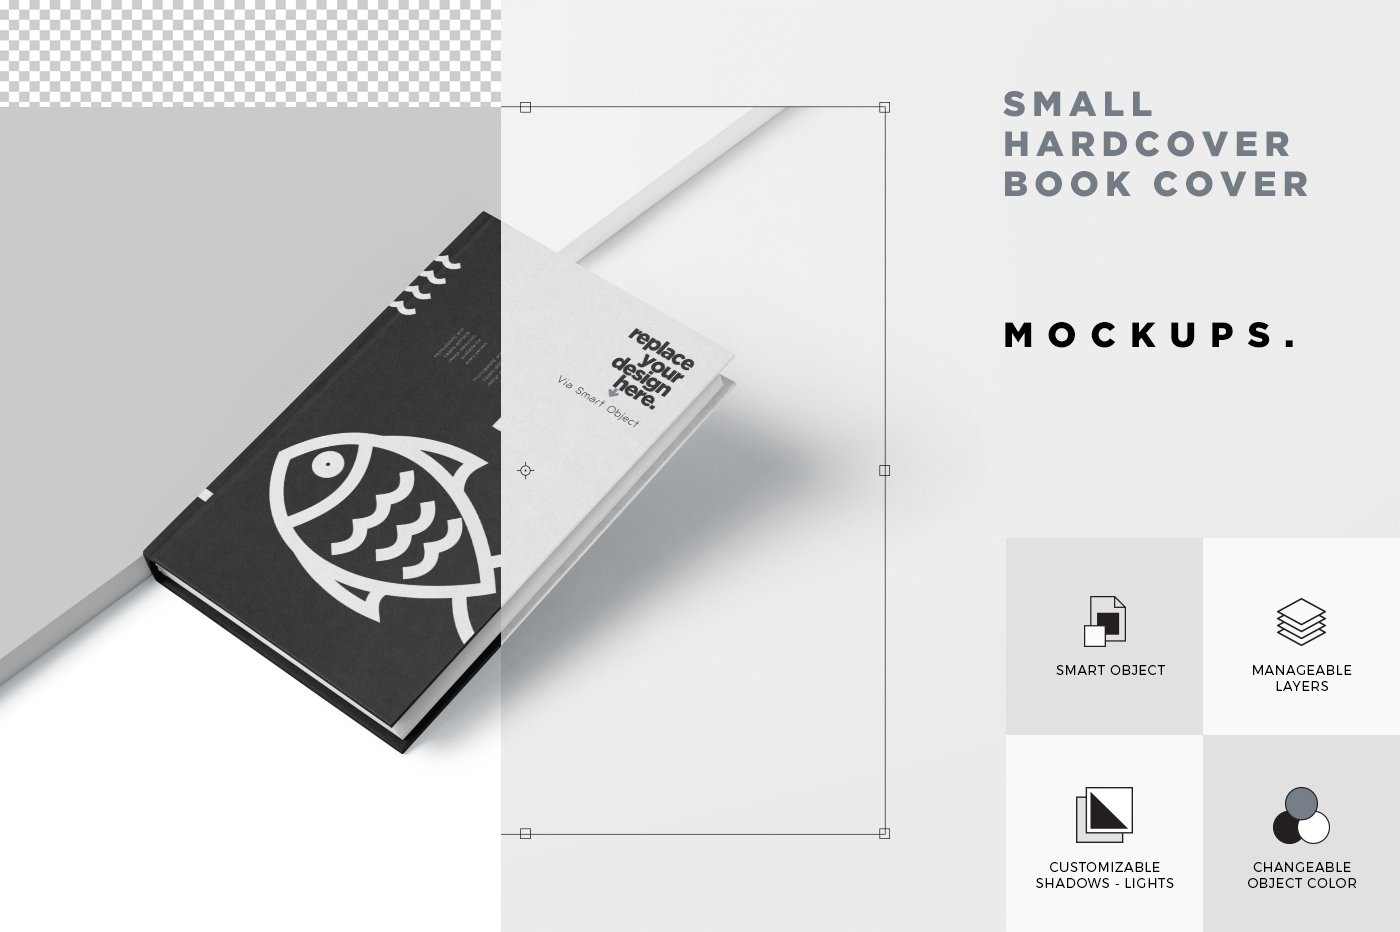 mockup features image 768